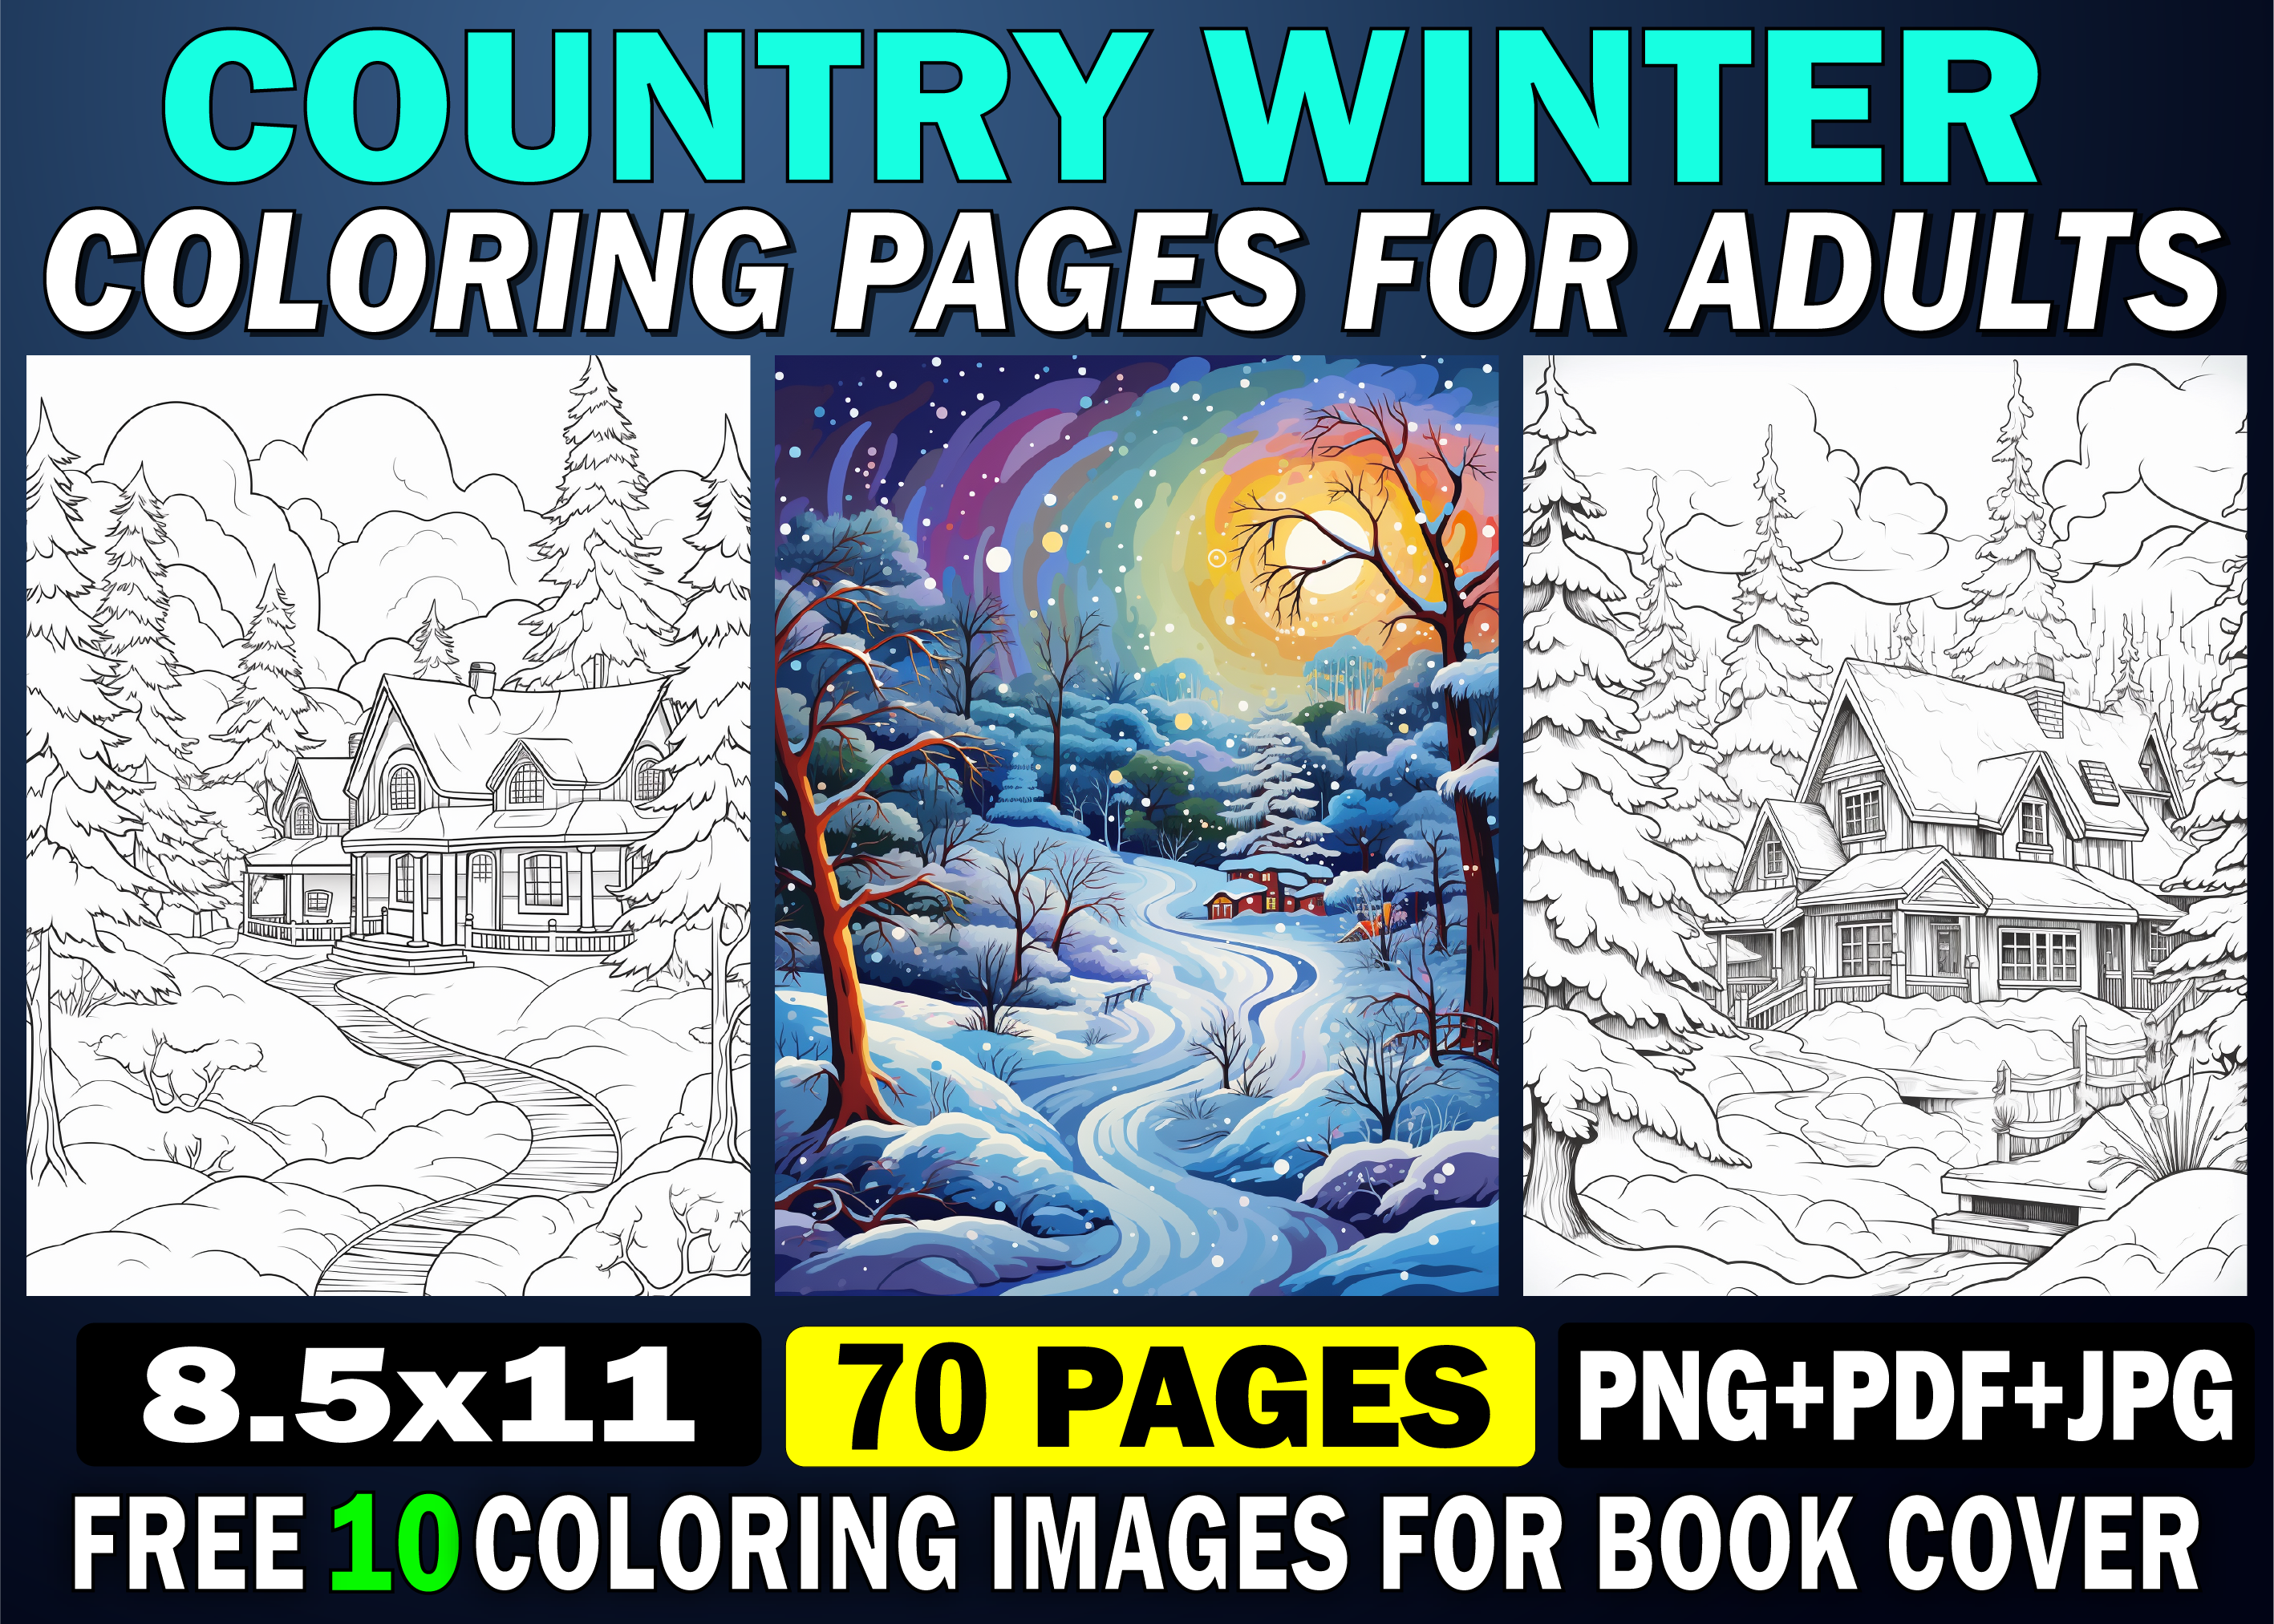 Country Winter Coloring Book For Adults: An amazing book Adult